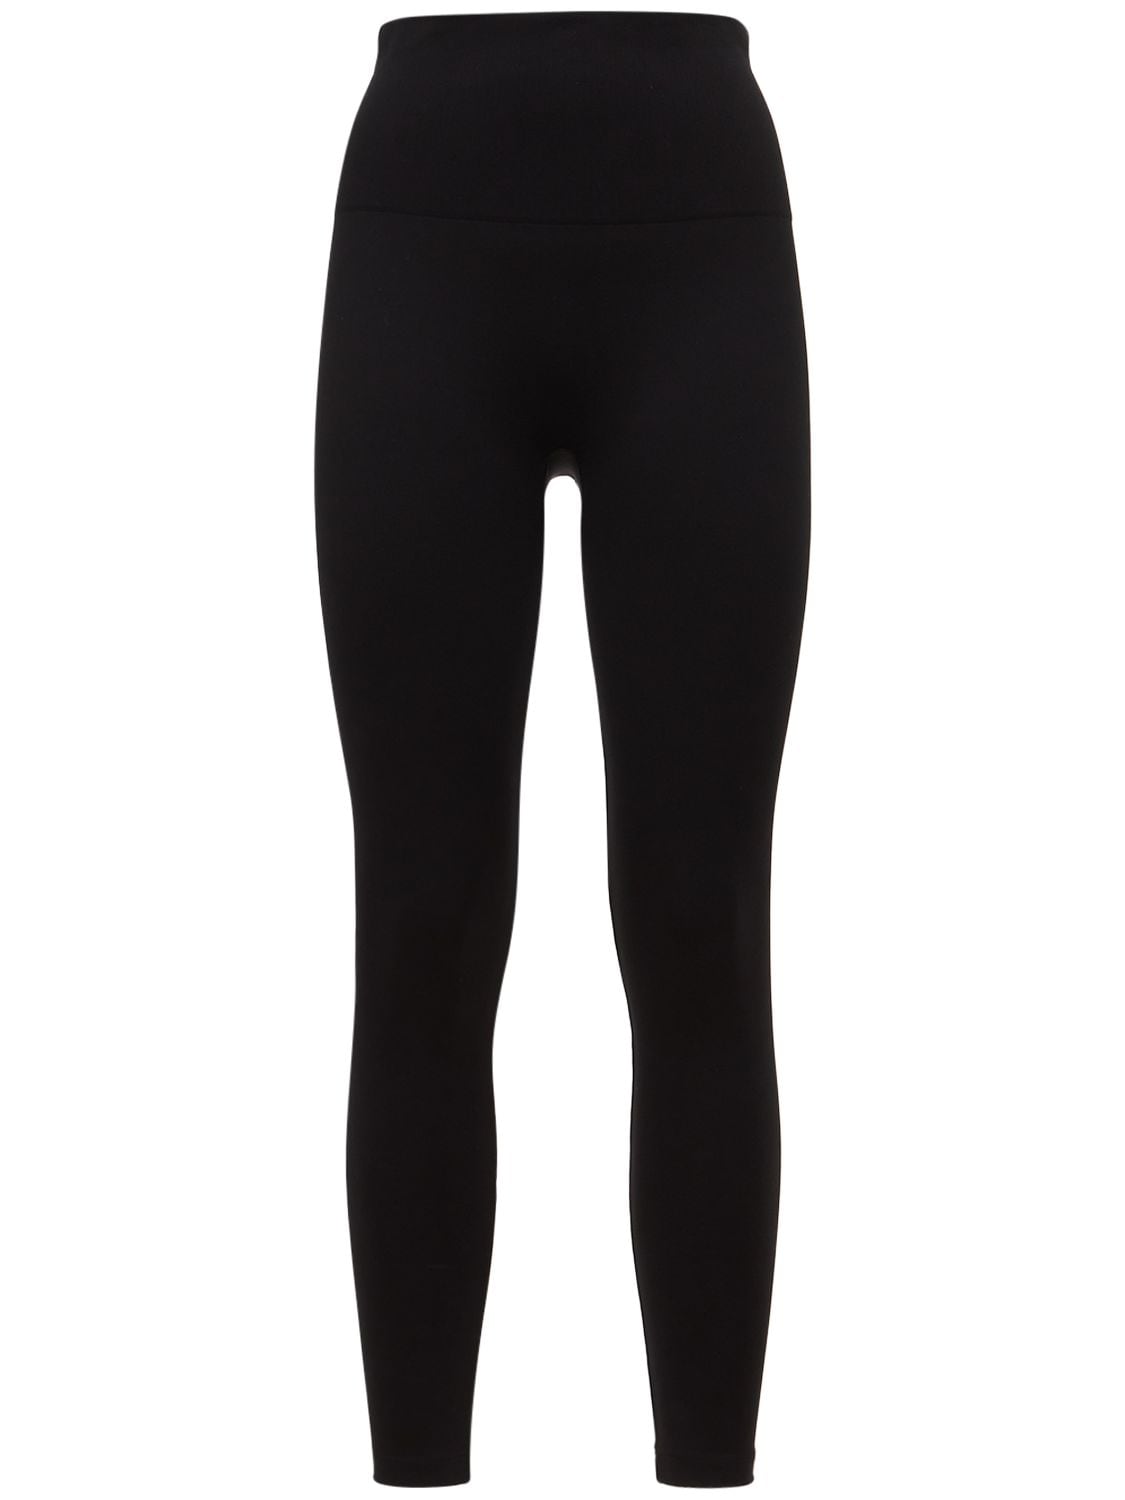 WOLFORD THE WONDERFUL COMPRESSION LEGGINGS